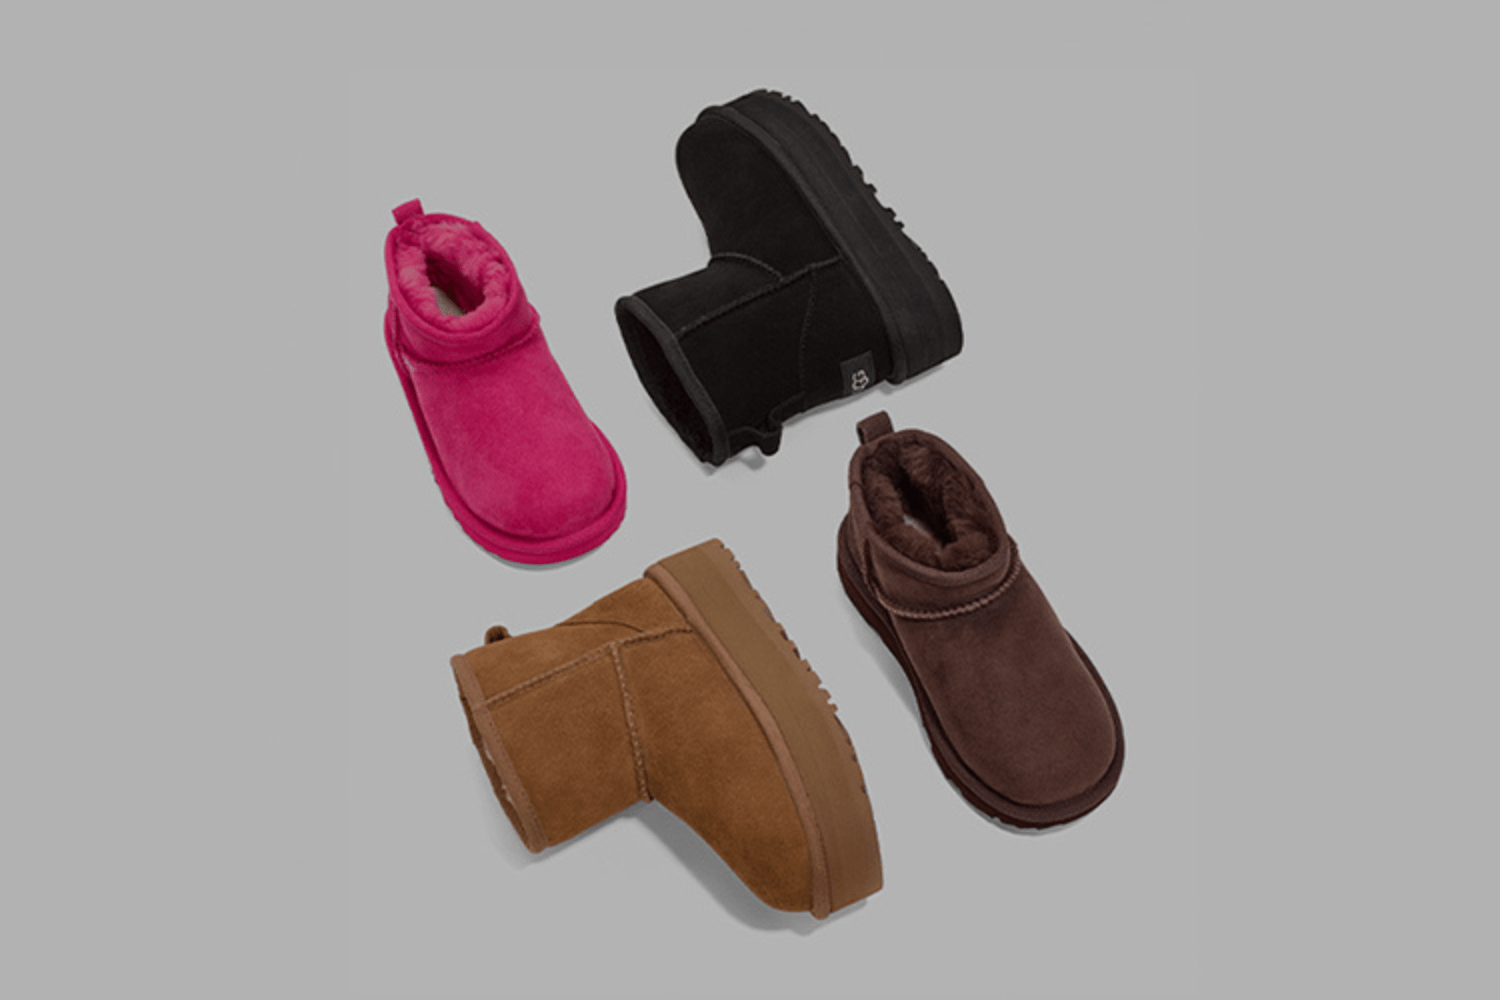 Our favourite UGG essentials for autumn